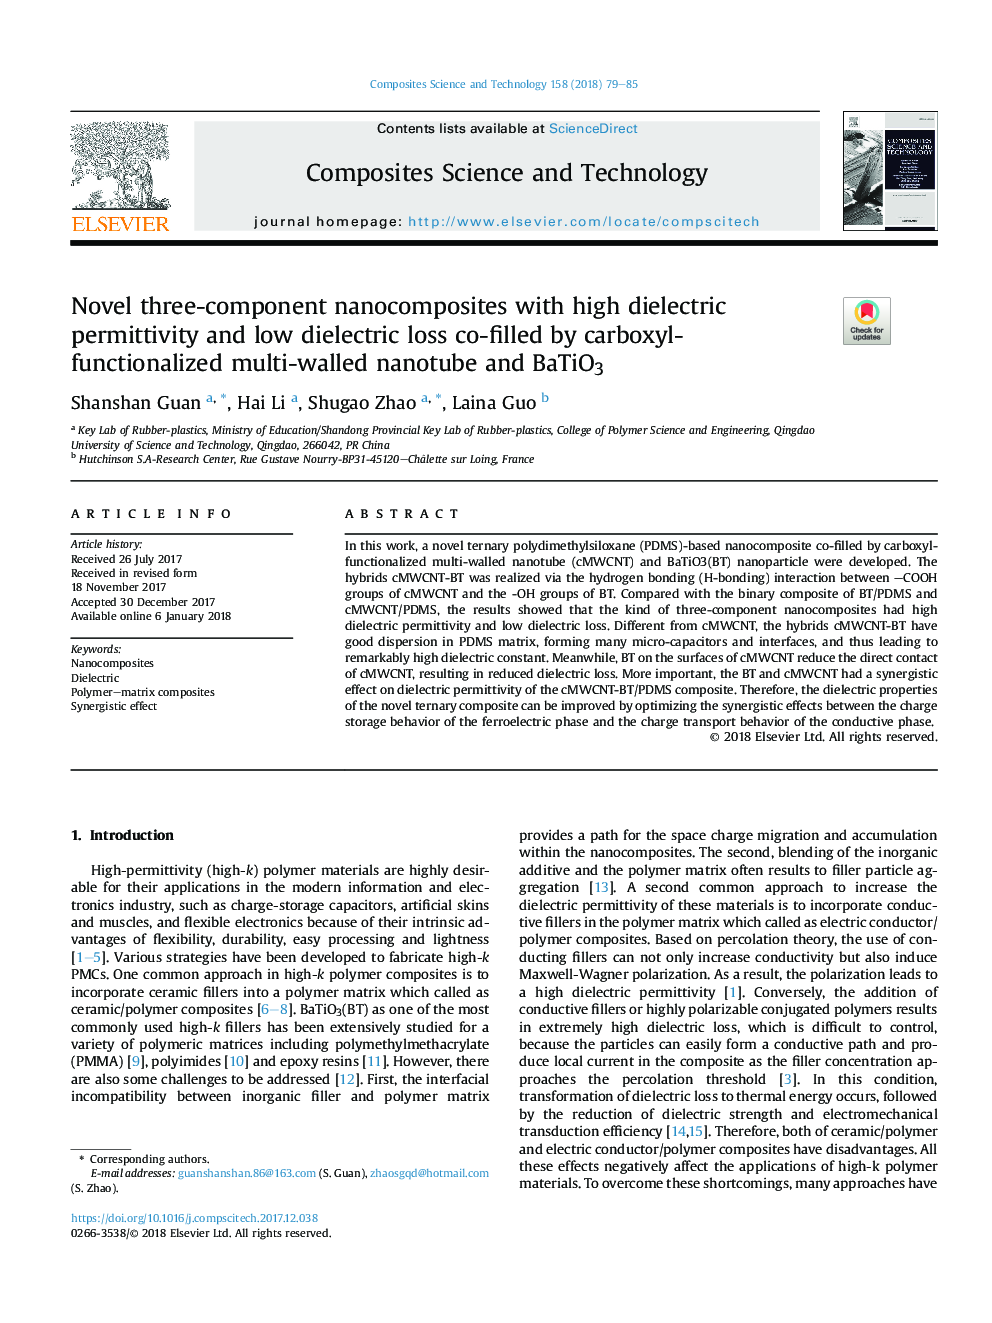 Novel three-component nanocomposites with high dielectric permittivity and low dielectric loss co-filled by carboxyl-functionalized multi-walled nanotube and BaTiO3